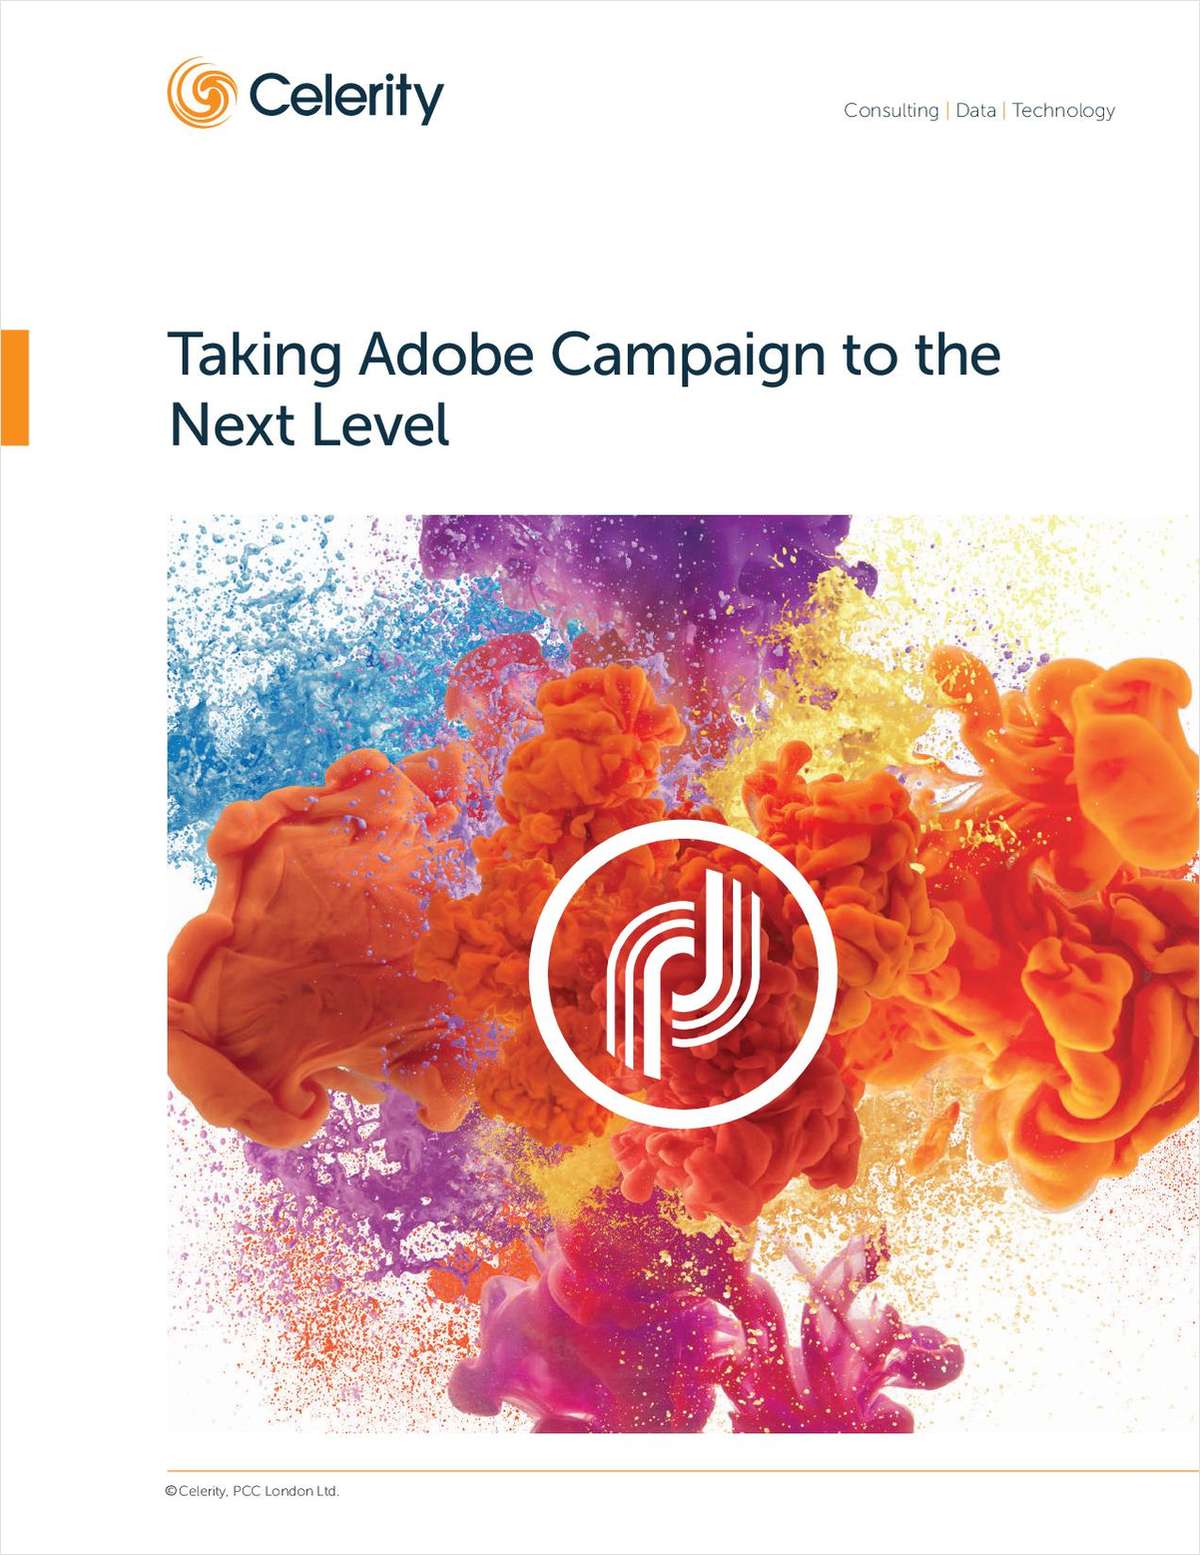 Take Adobe Campaign to The Next Level for Enterprise Marketing